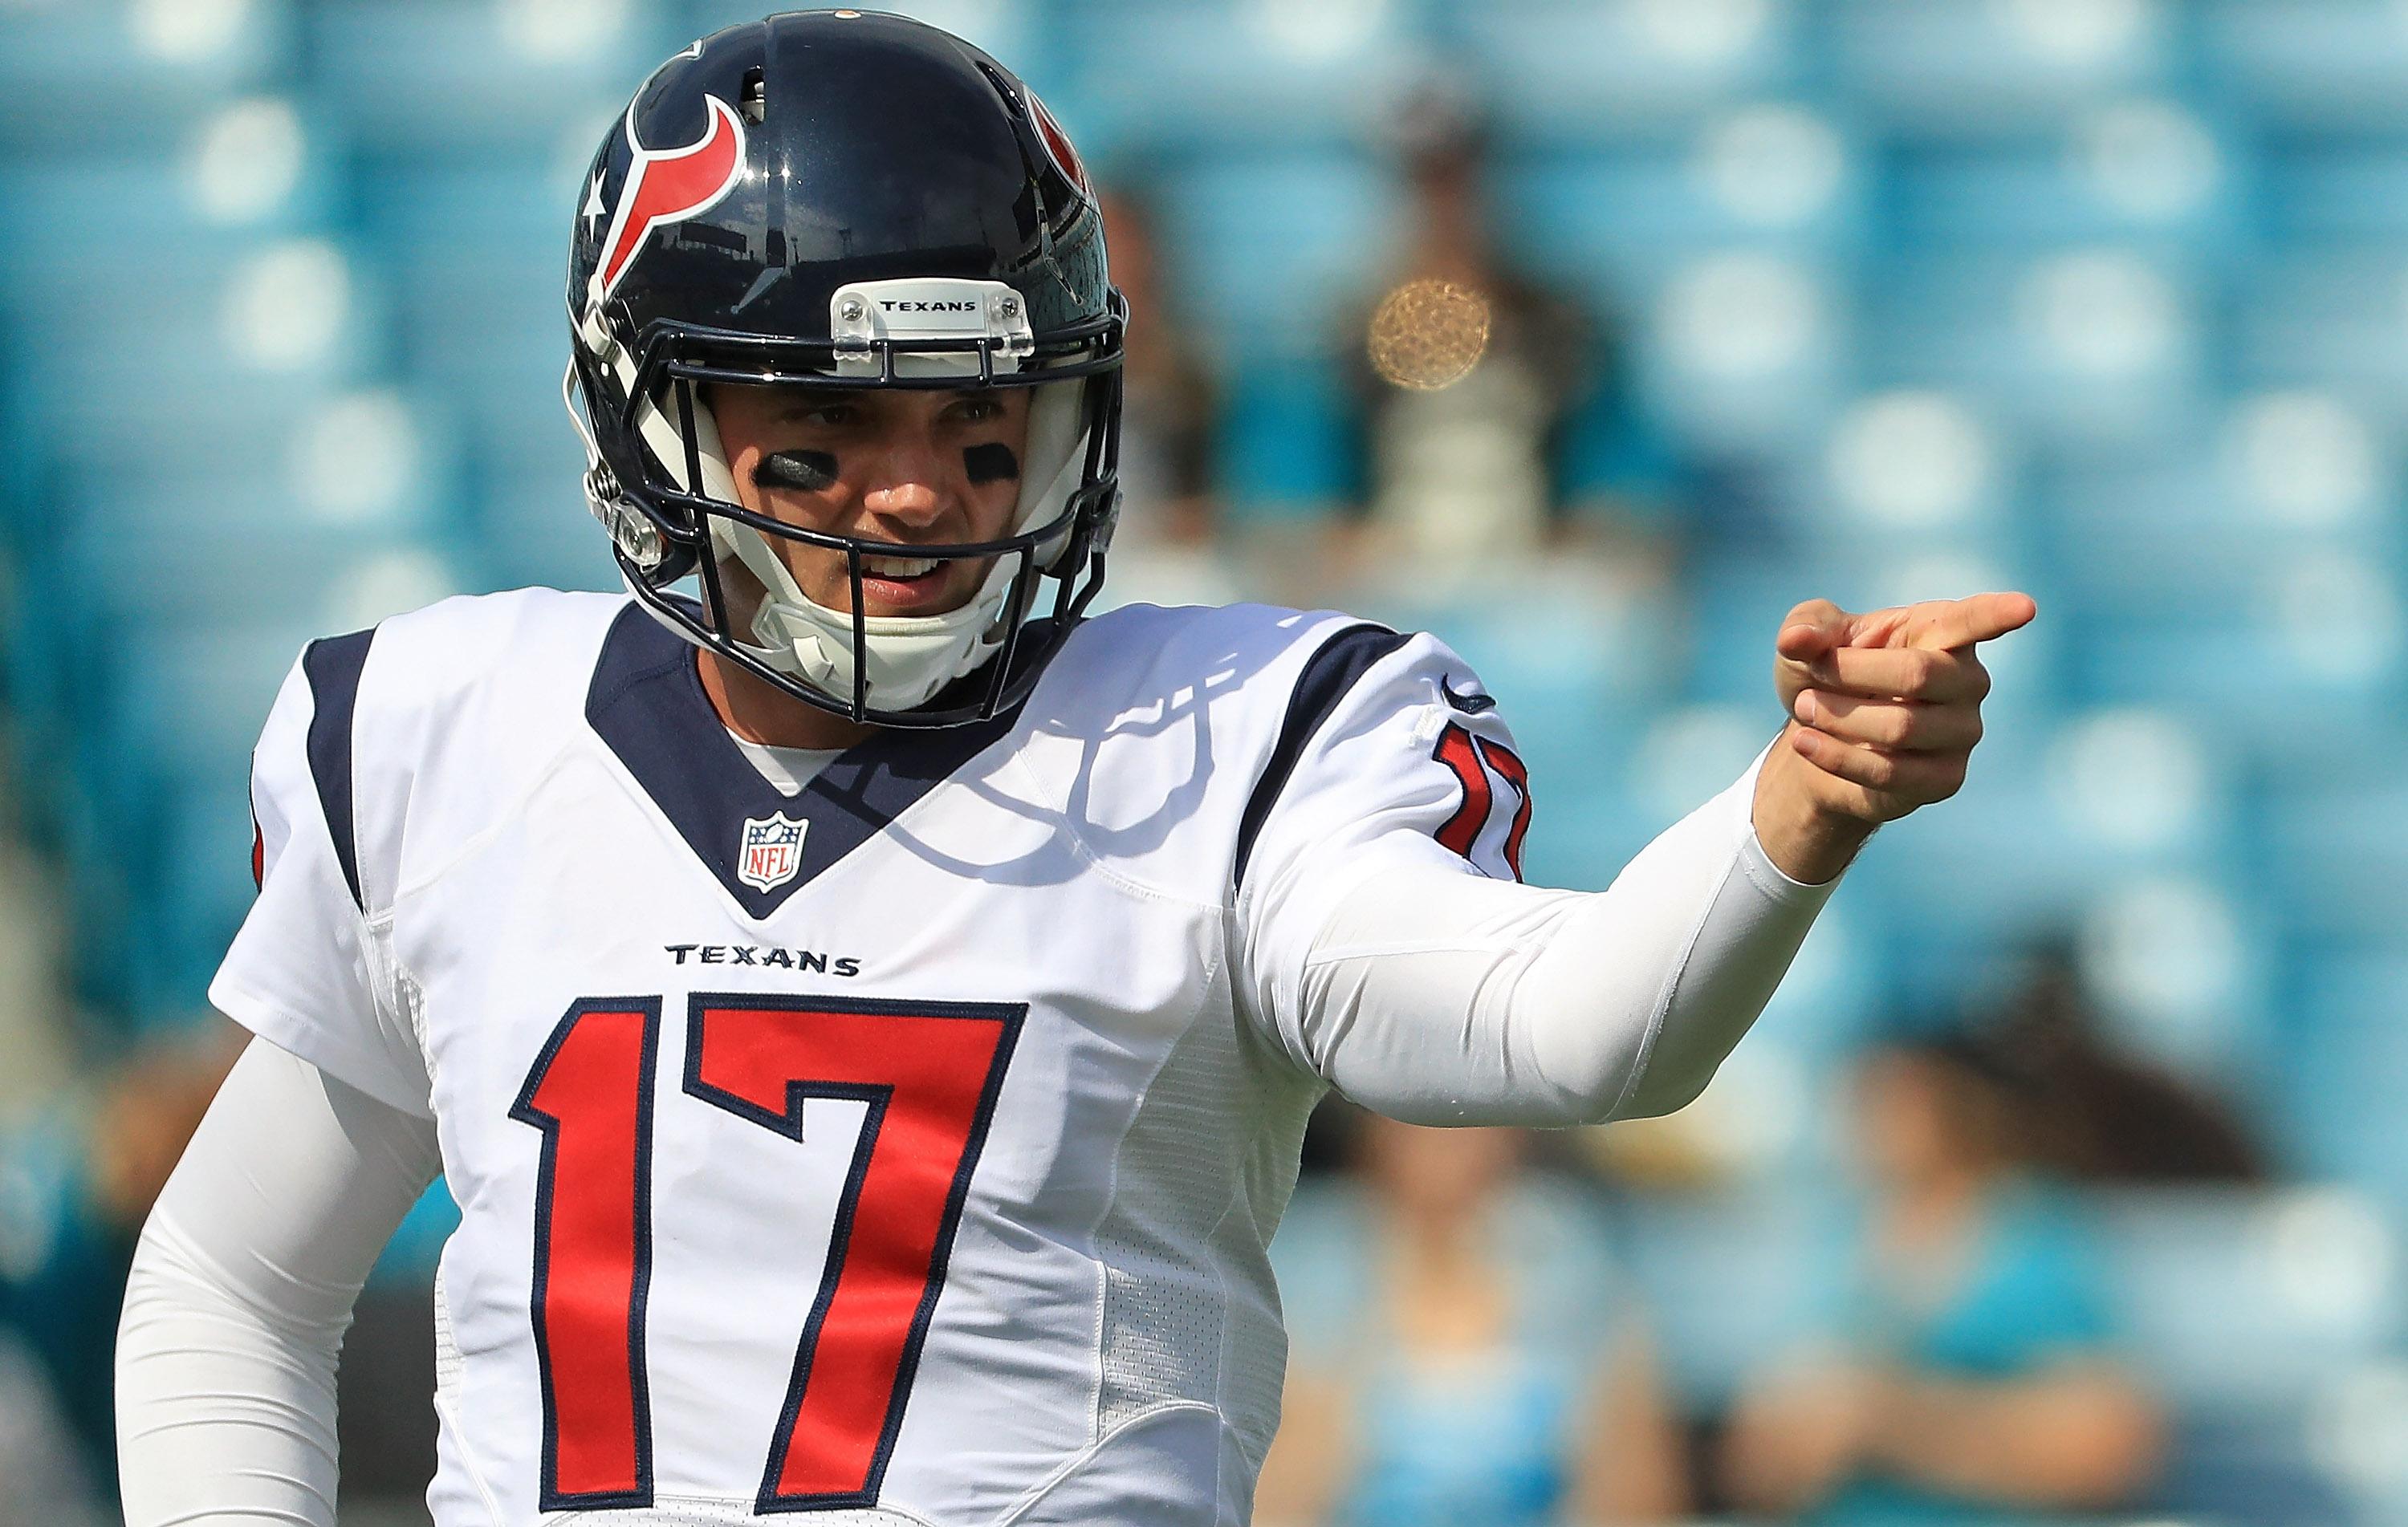 Brock Osweiler #17 of the Houston Texans warms up before a game.